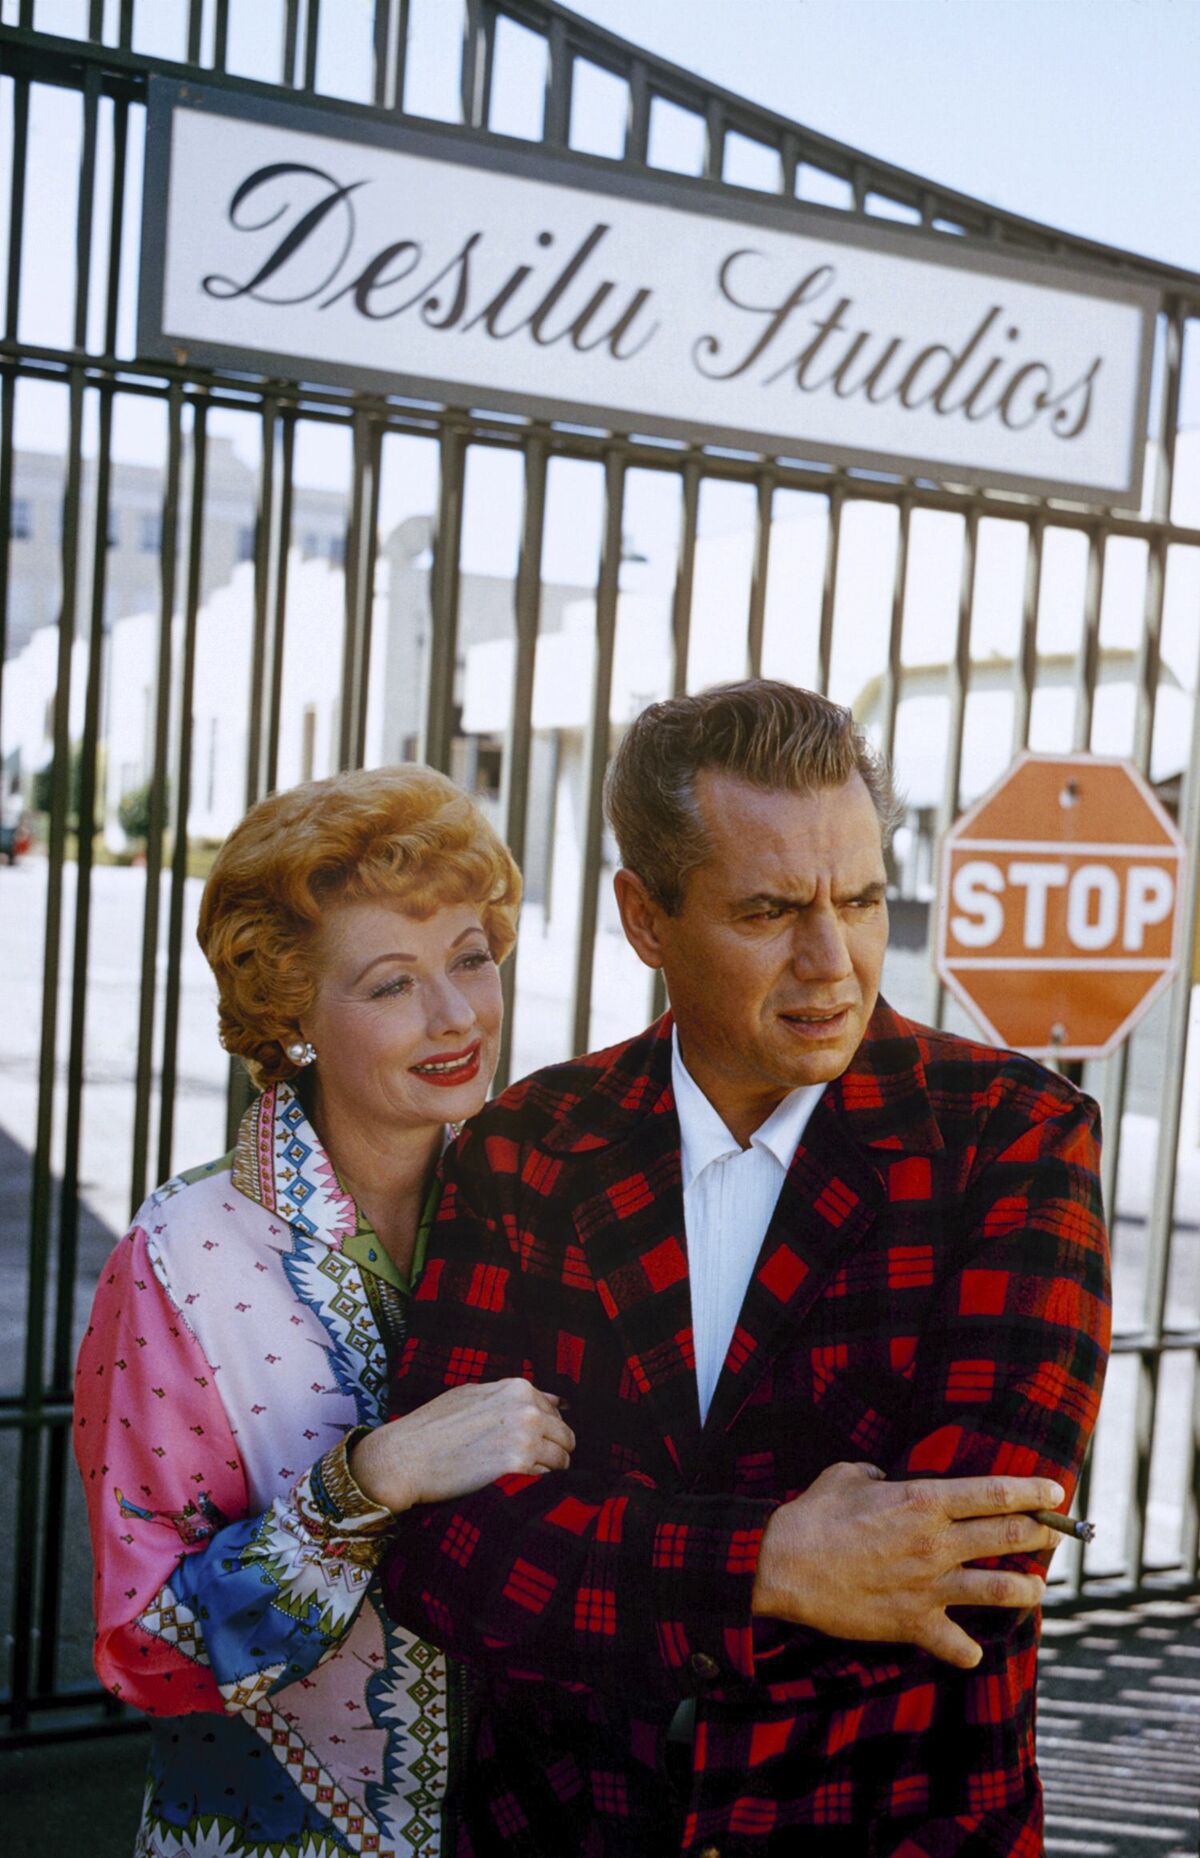 A woman and a man standing outside a Hollywood studio building with a sign that says "Desilu Studios."